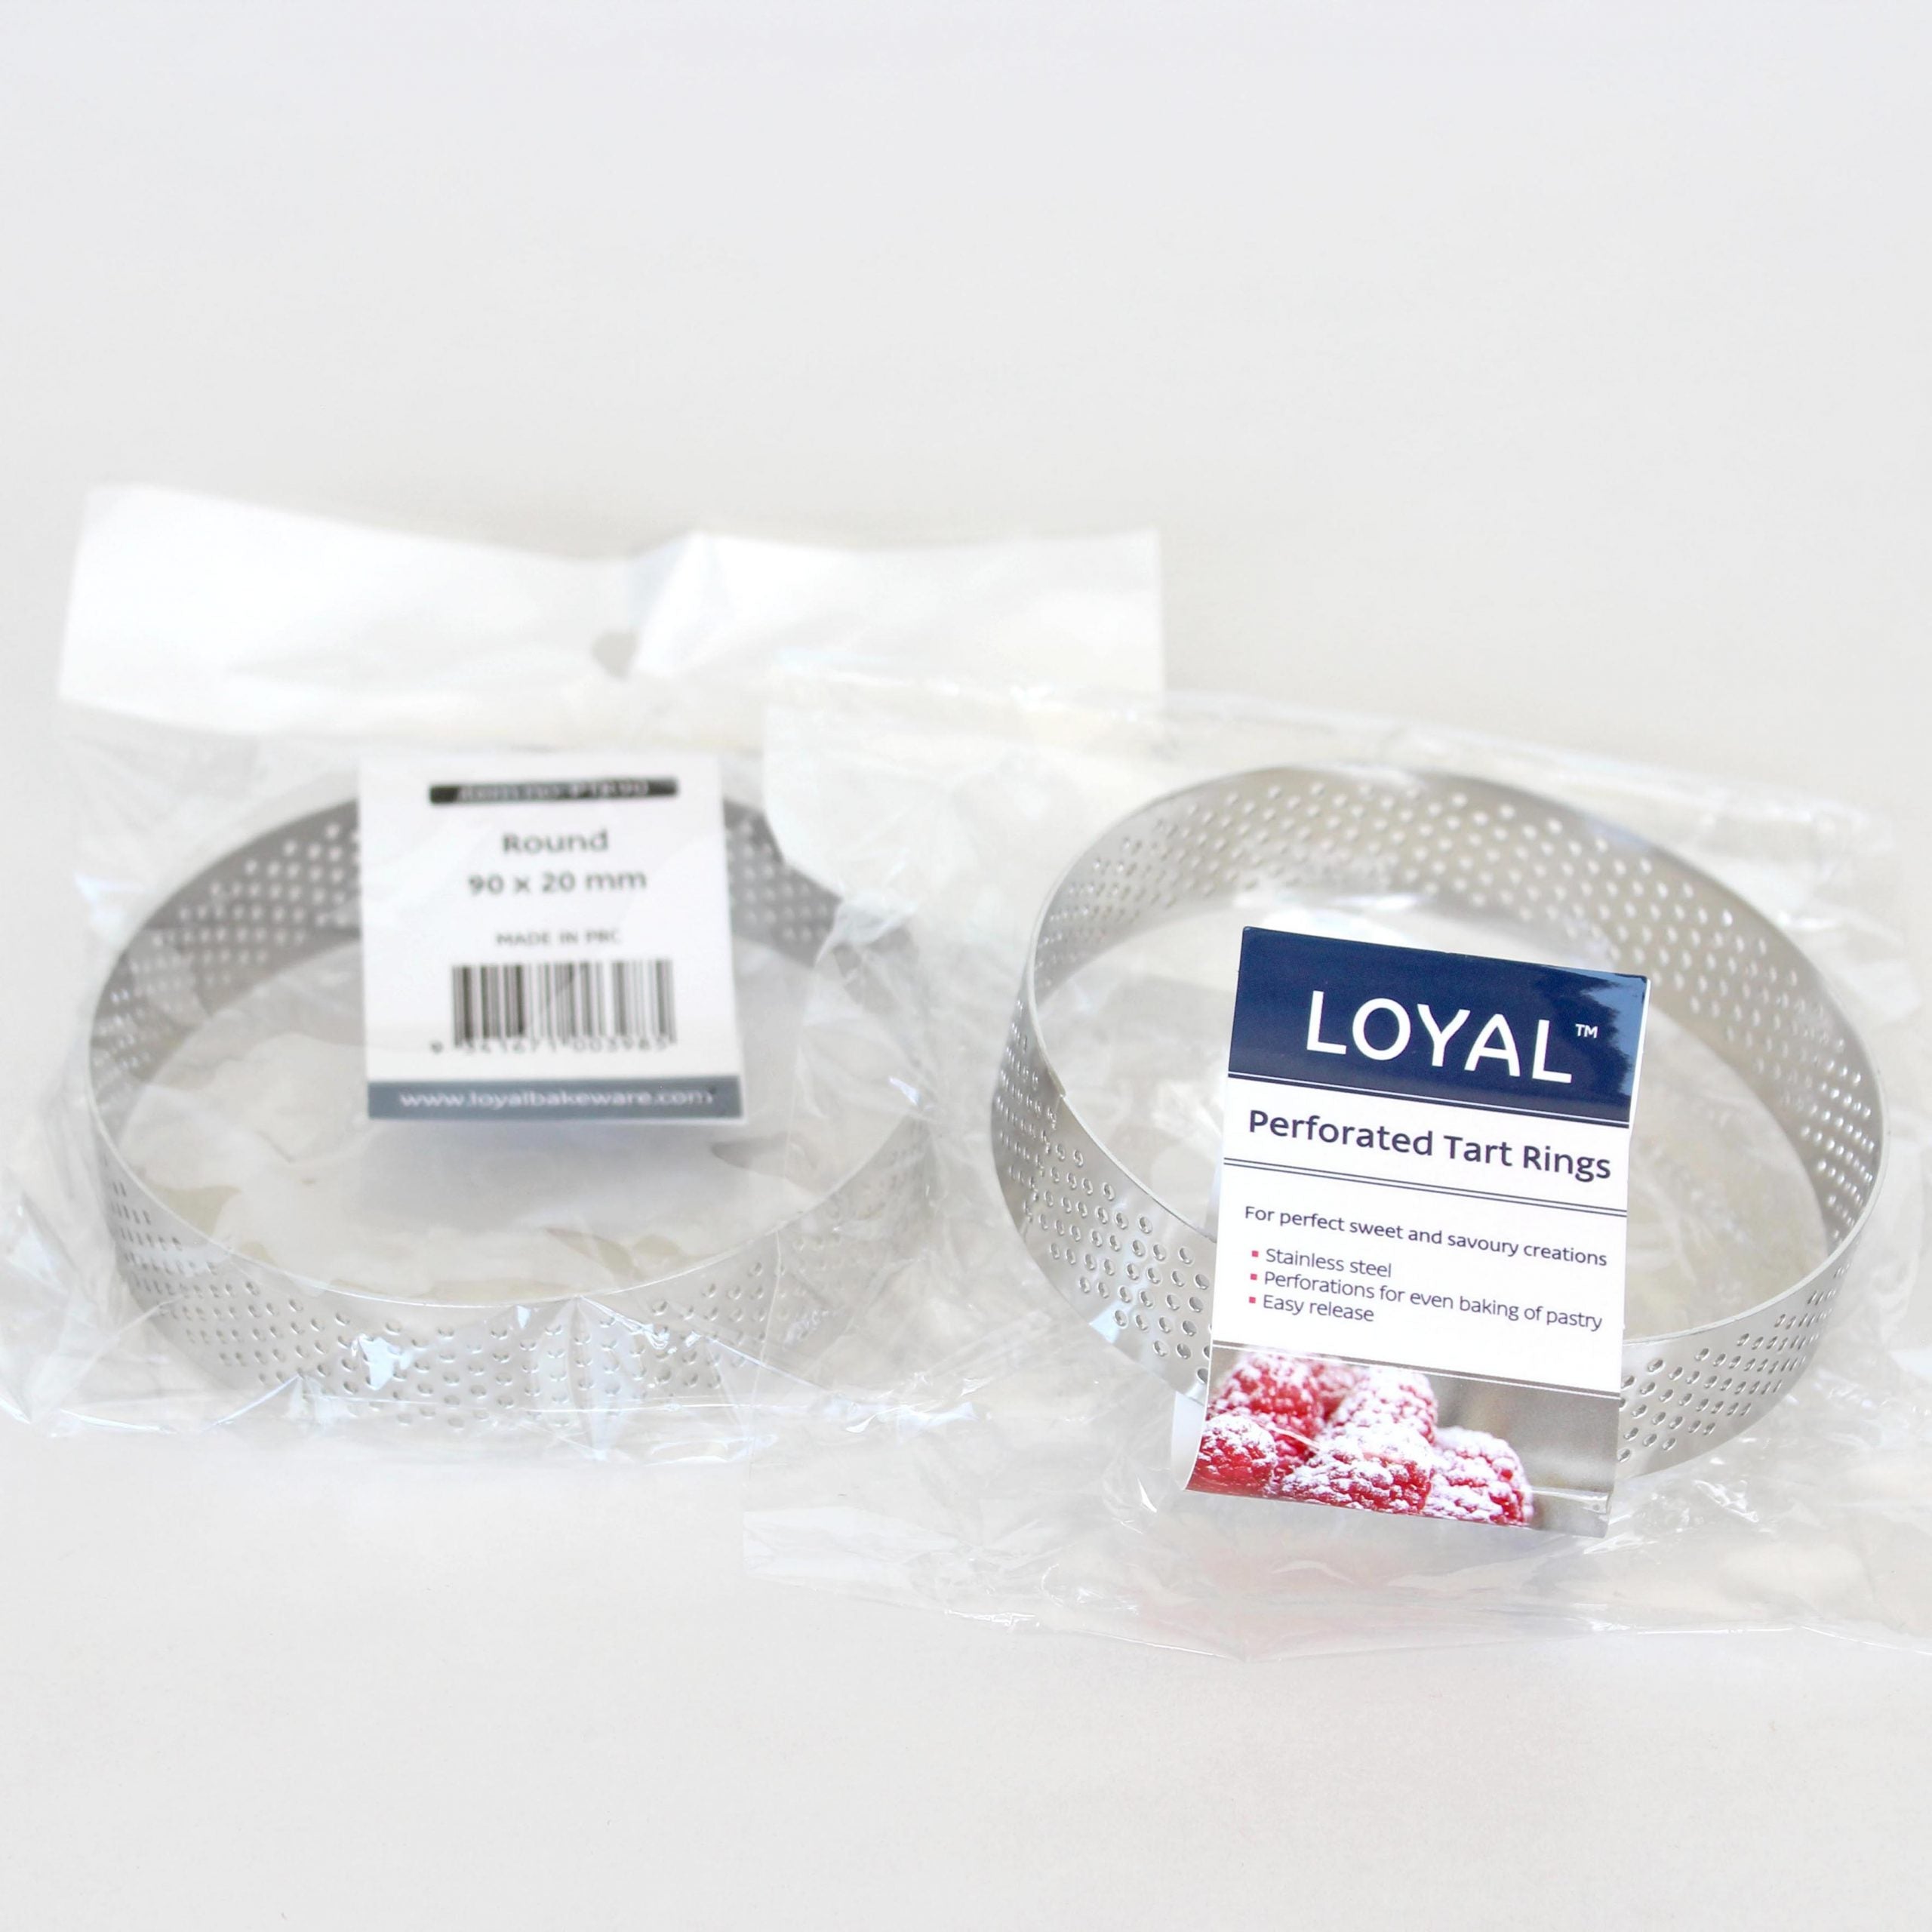 LOYAL 90mm x 20mm Perforated Tart Ring S/S